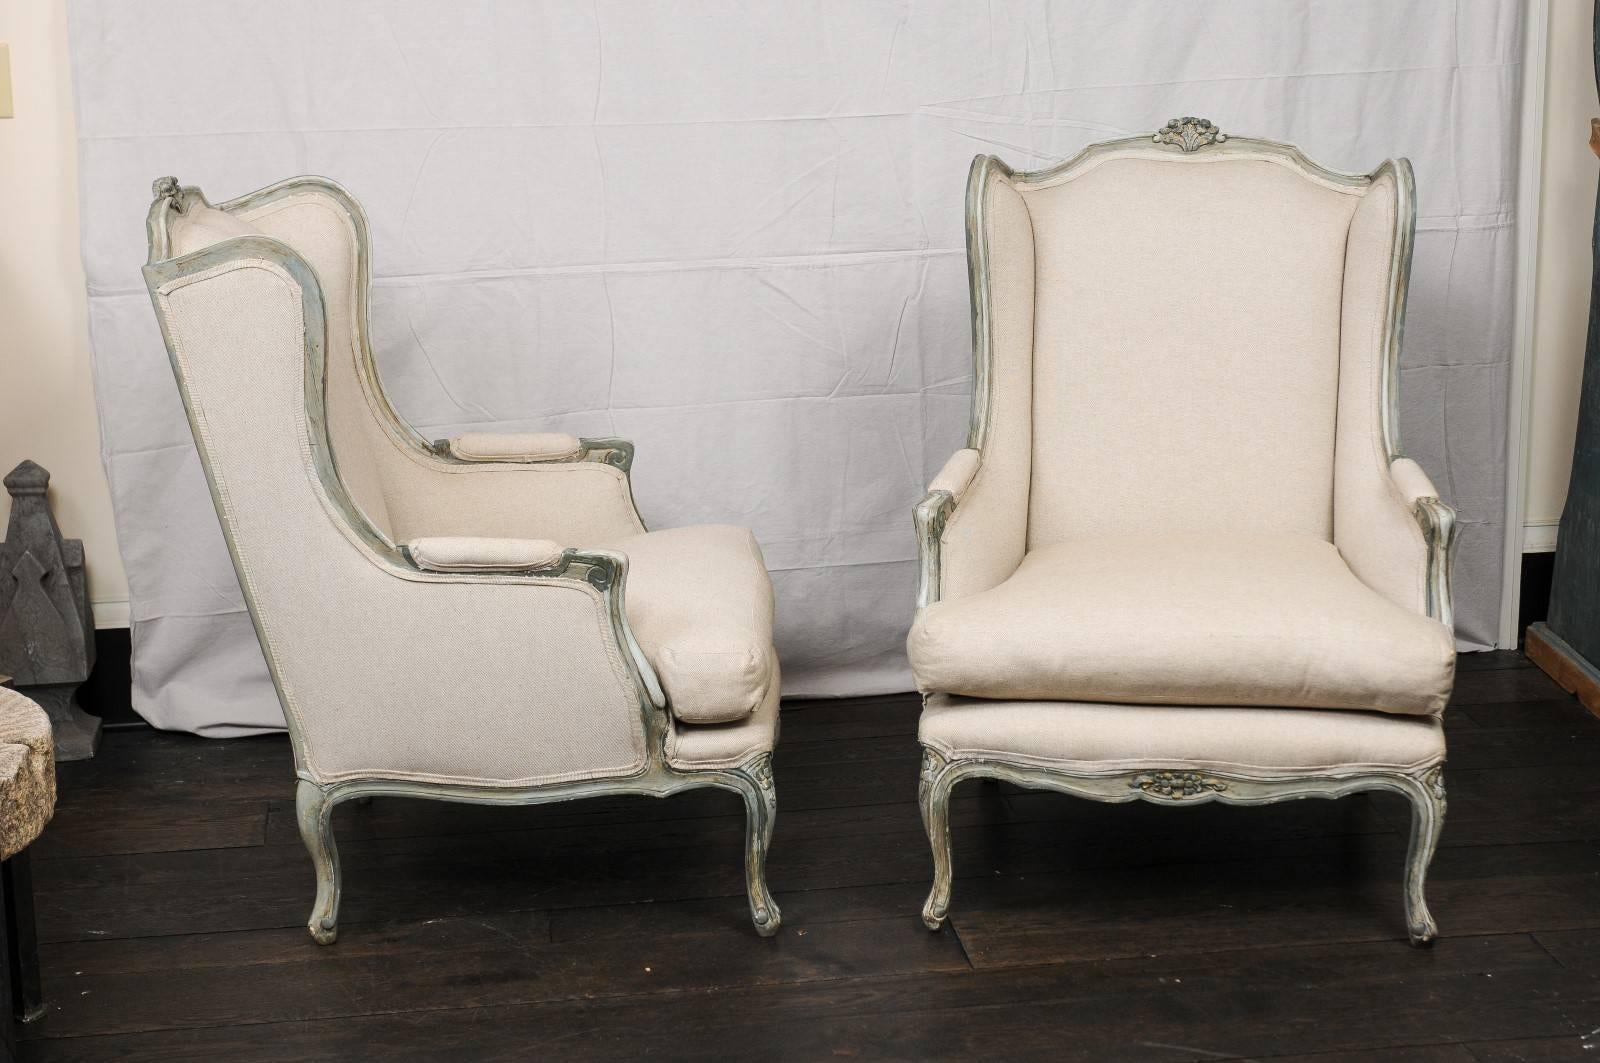 Pair of Mid-20th Century French Carved Wood and Upholstered Wingback Chairs 1